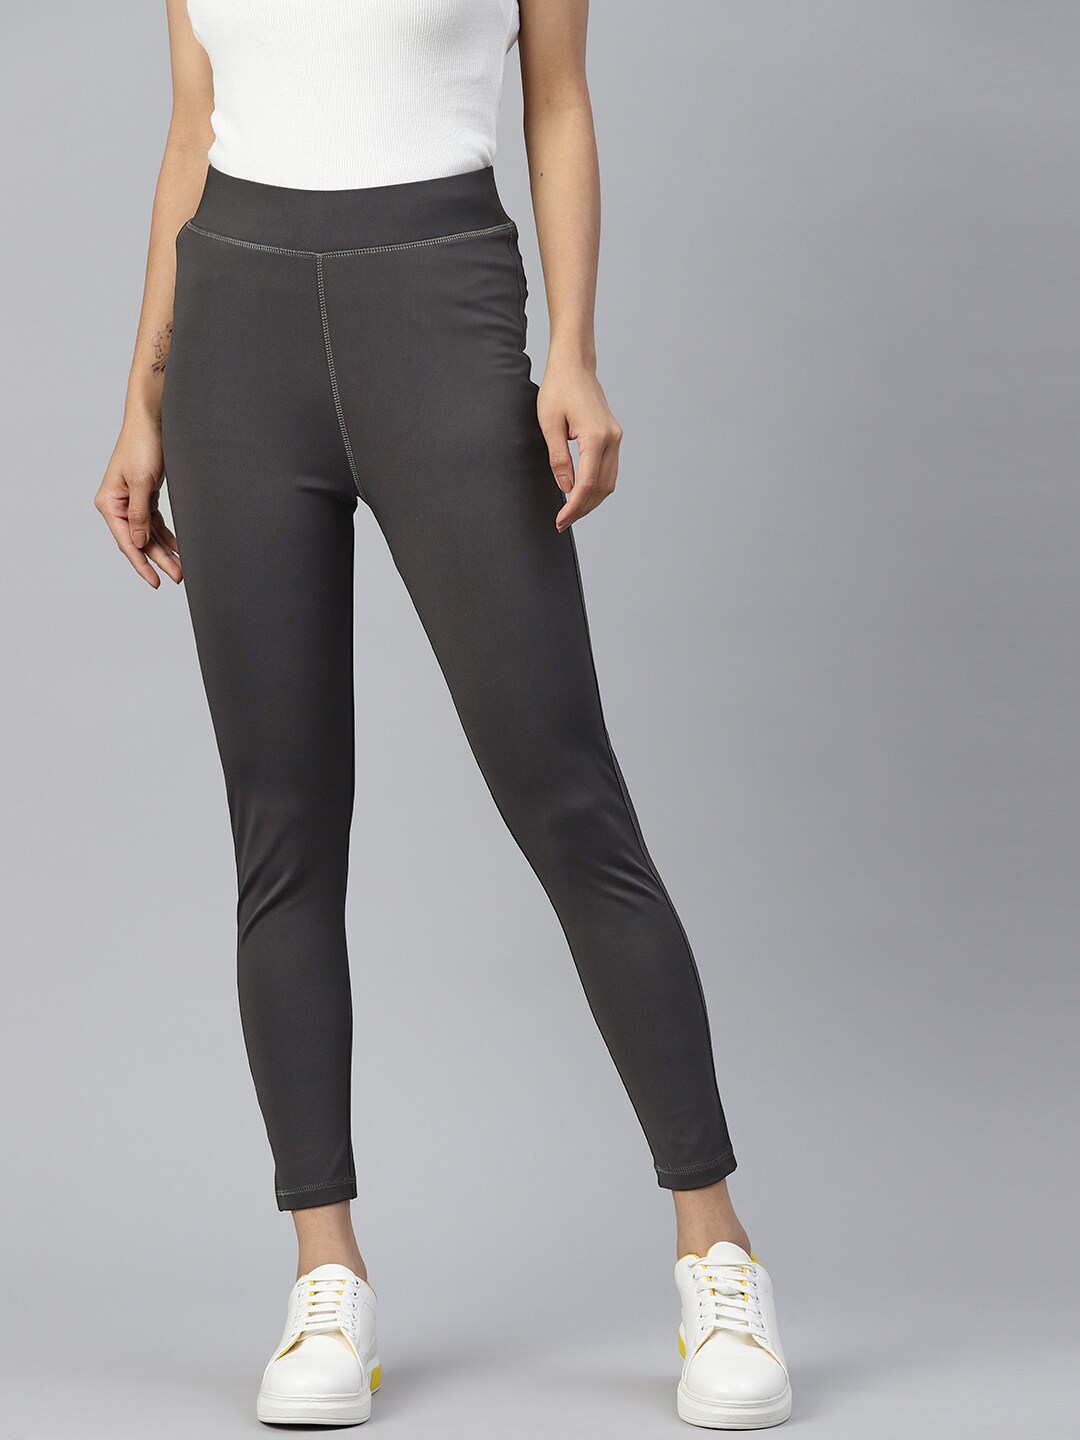 Popnetic Women Slim Fit Trousers Price in India